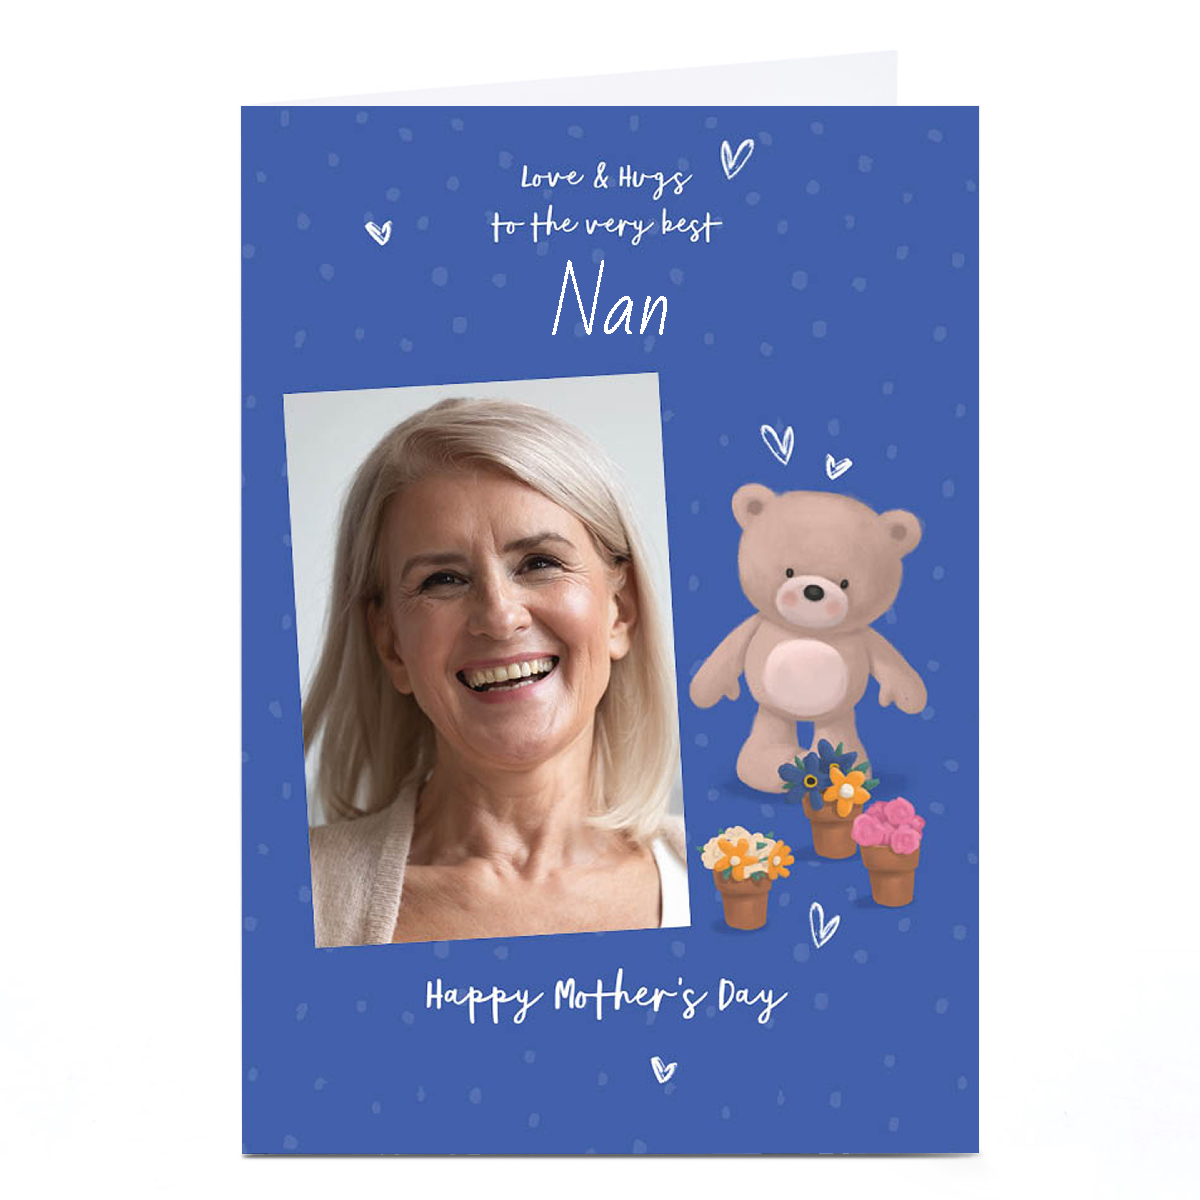 Personalised Mother's Day Card - Hugs Bear with flowers - Nan